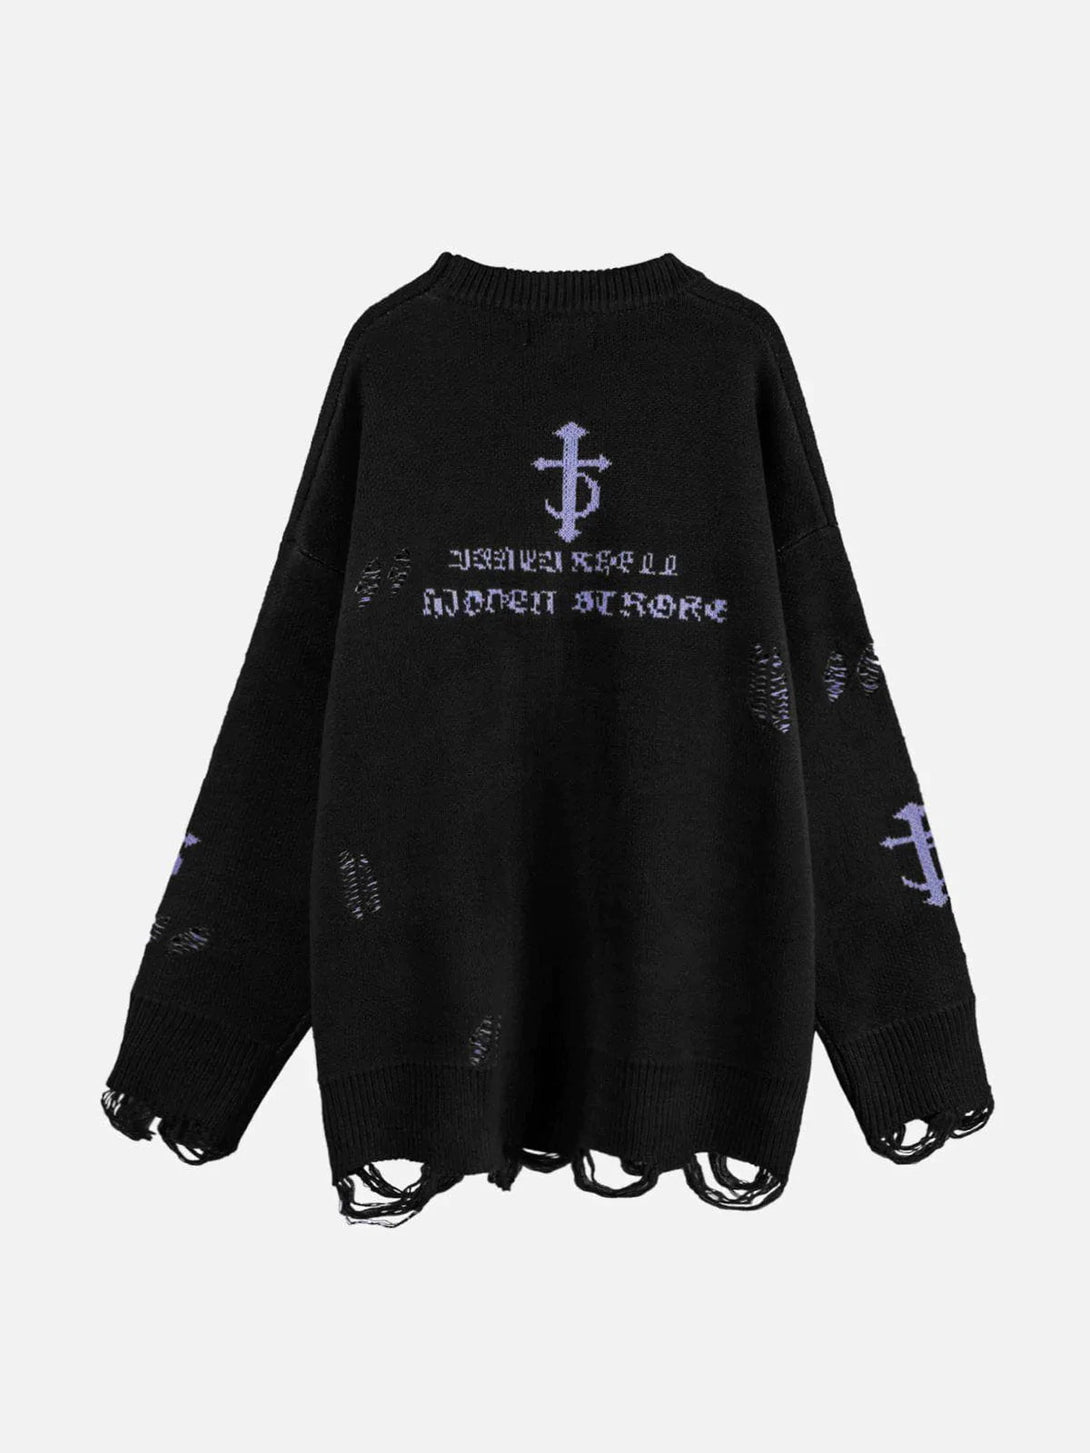 Majesda® - Vintage Gothic Ripped Sweater outfit ideas streetwear fashion